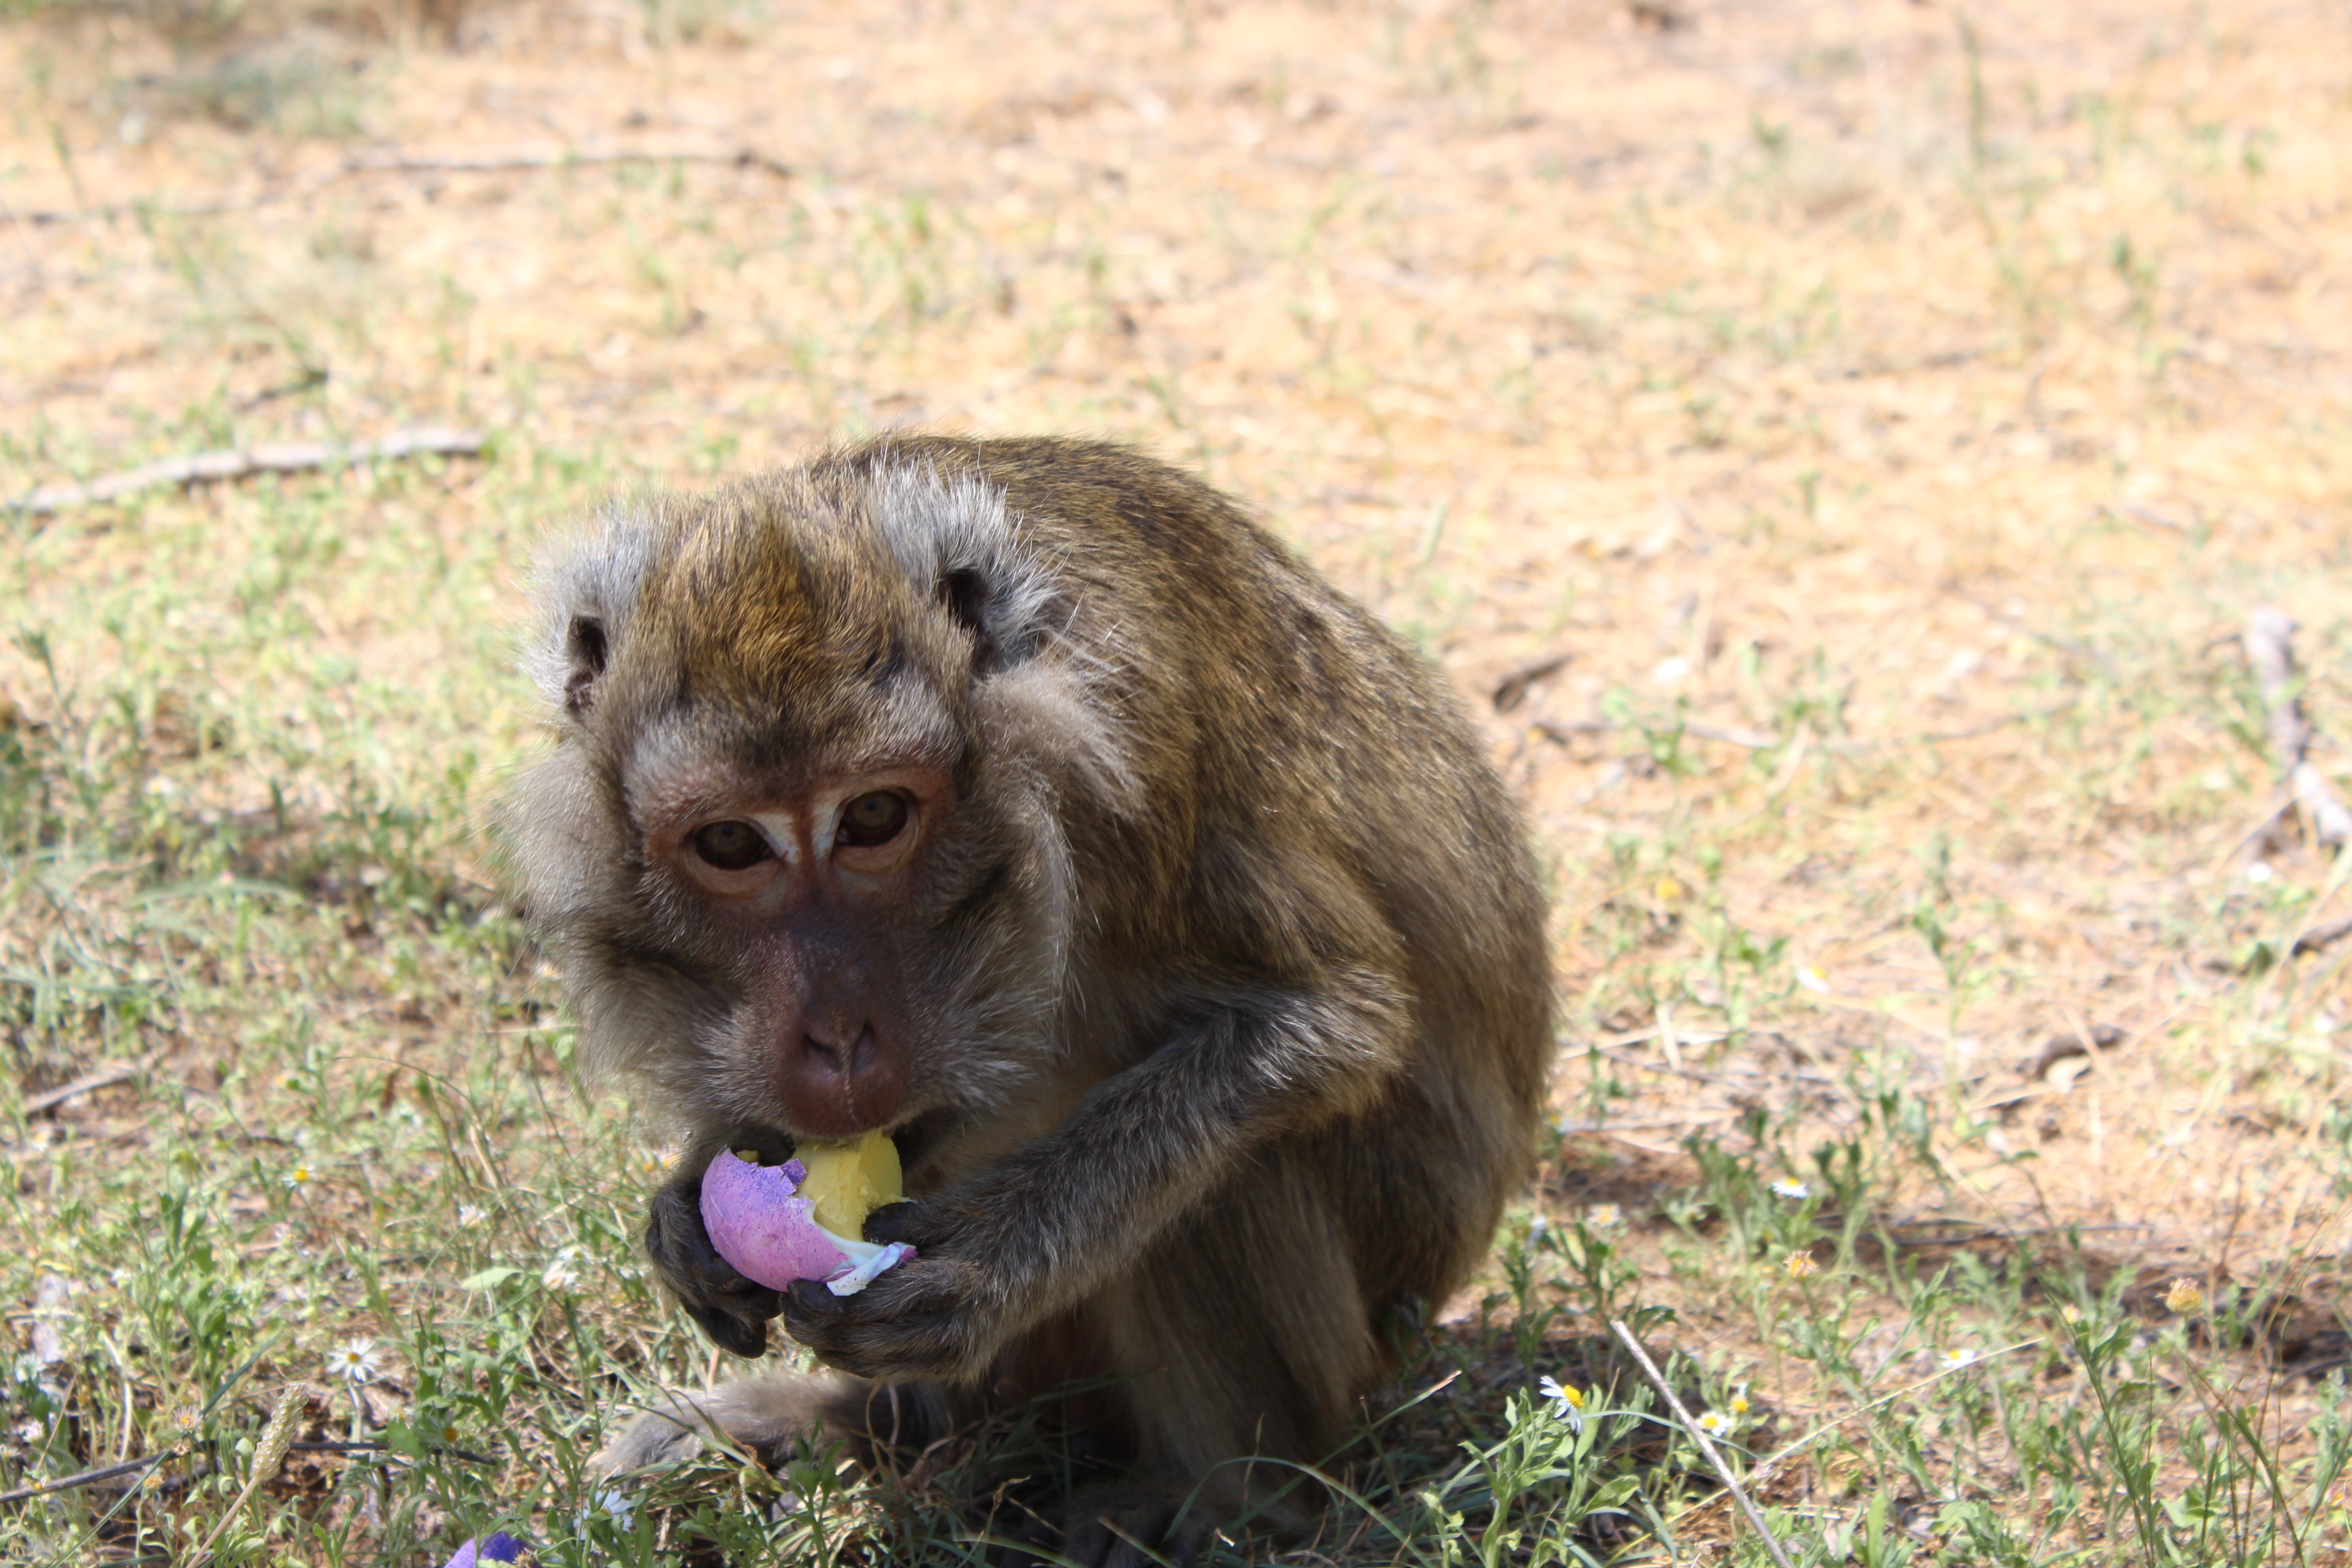 Long-tail macaque Gus enjoys some Easter eggs! Photo: Born Free USA.